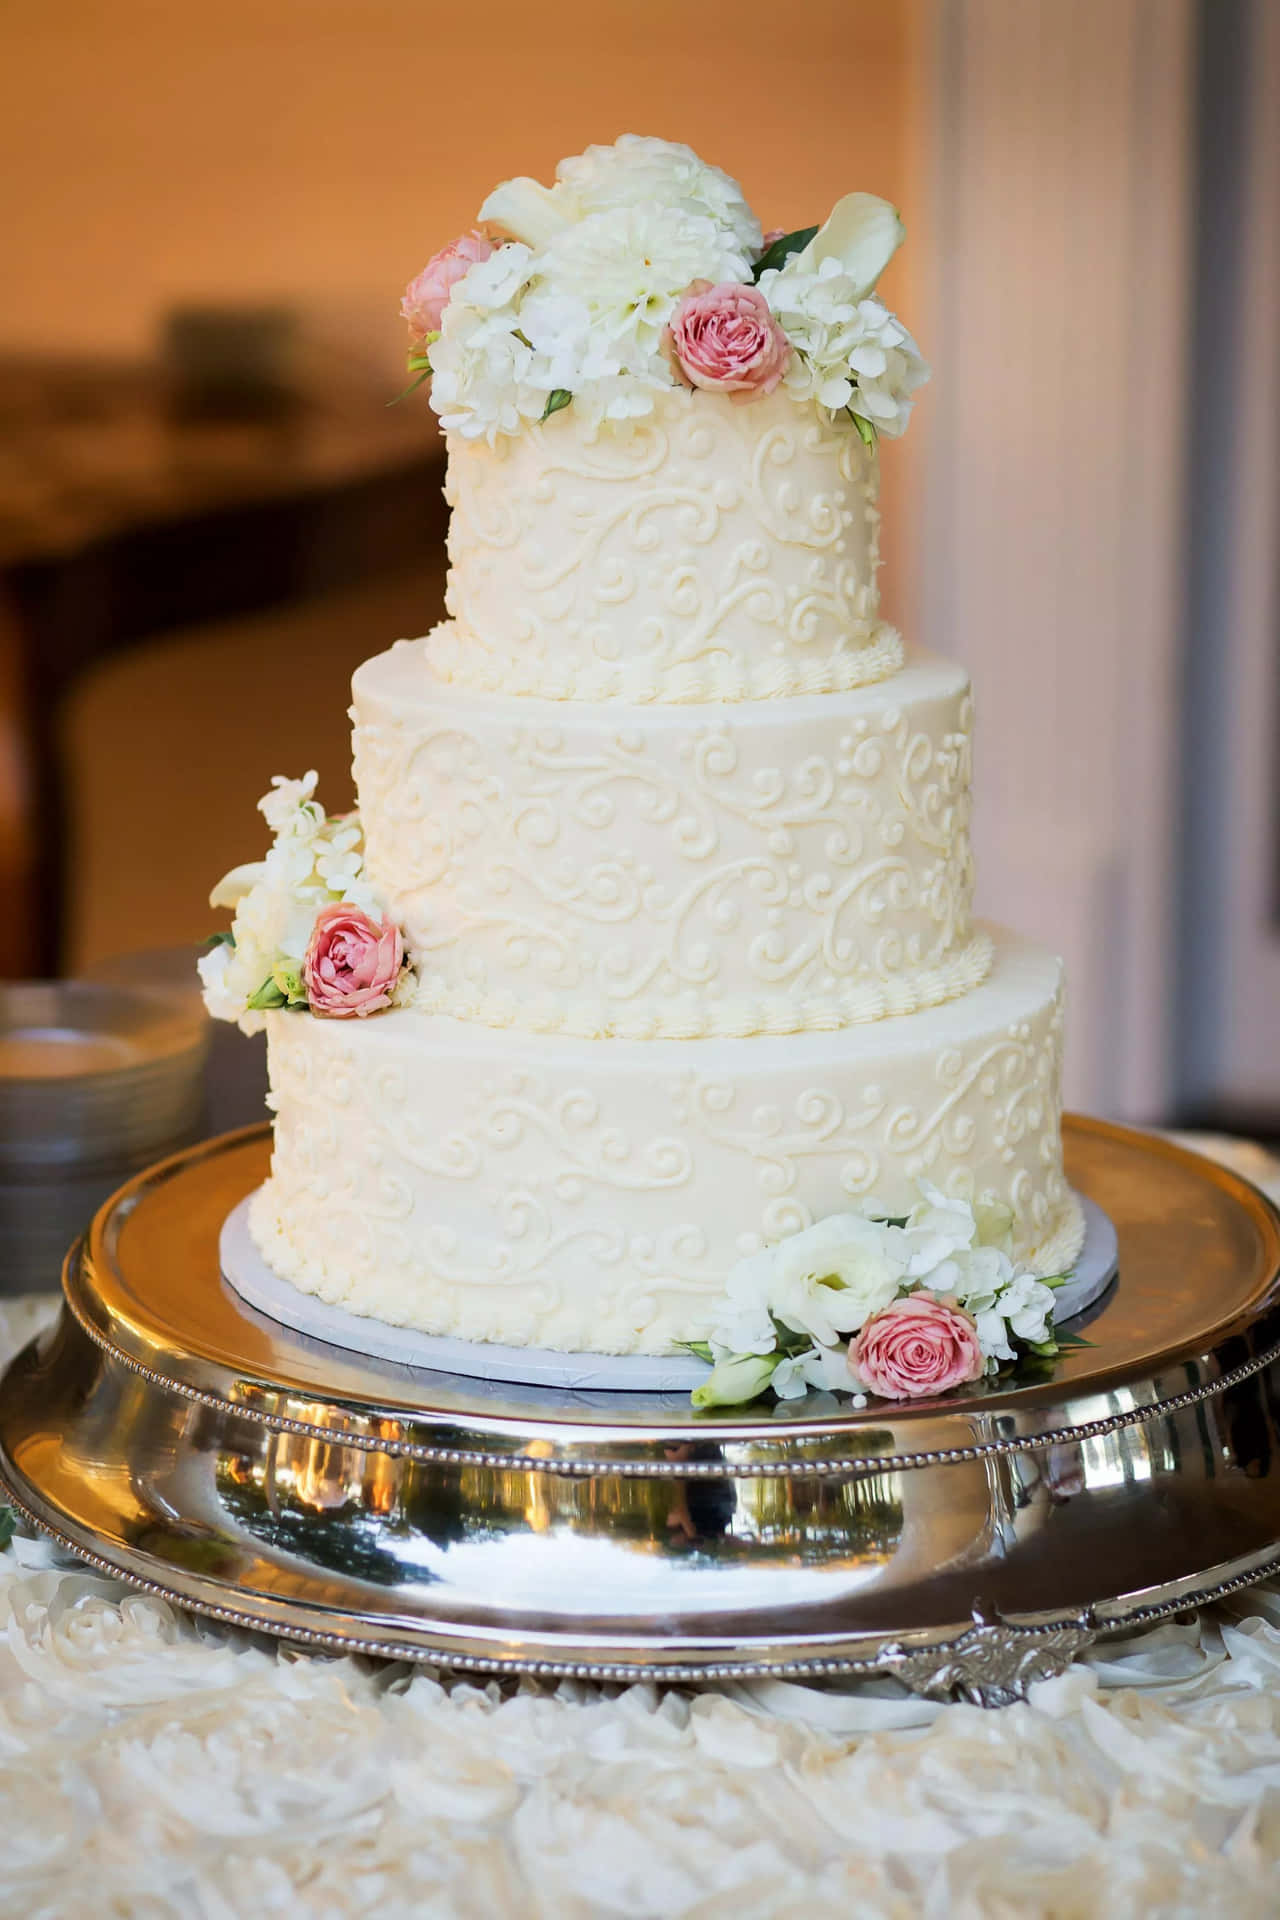 A White Wedding Cake On A Silver Plate